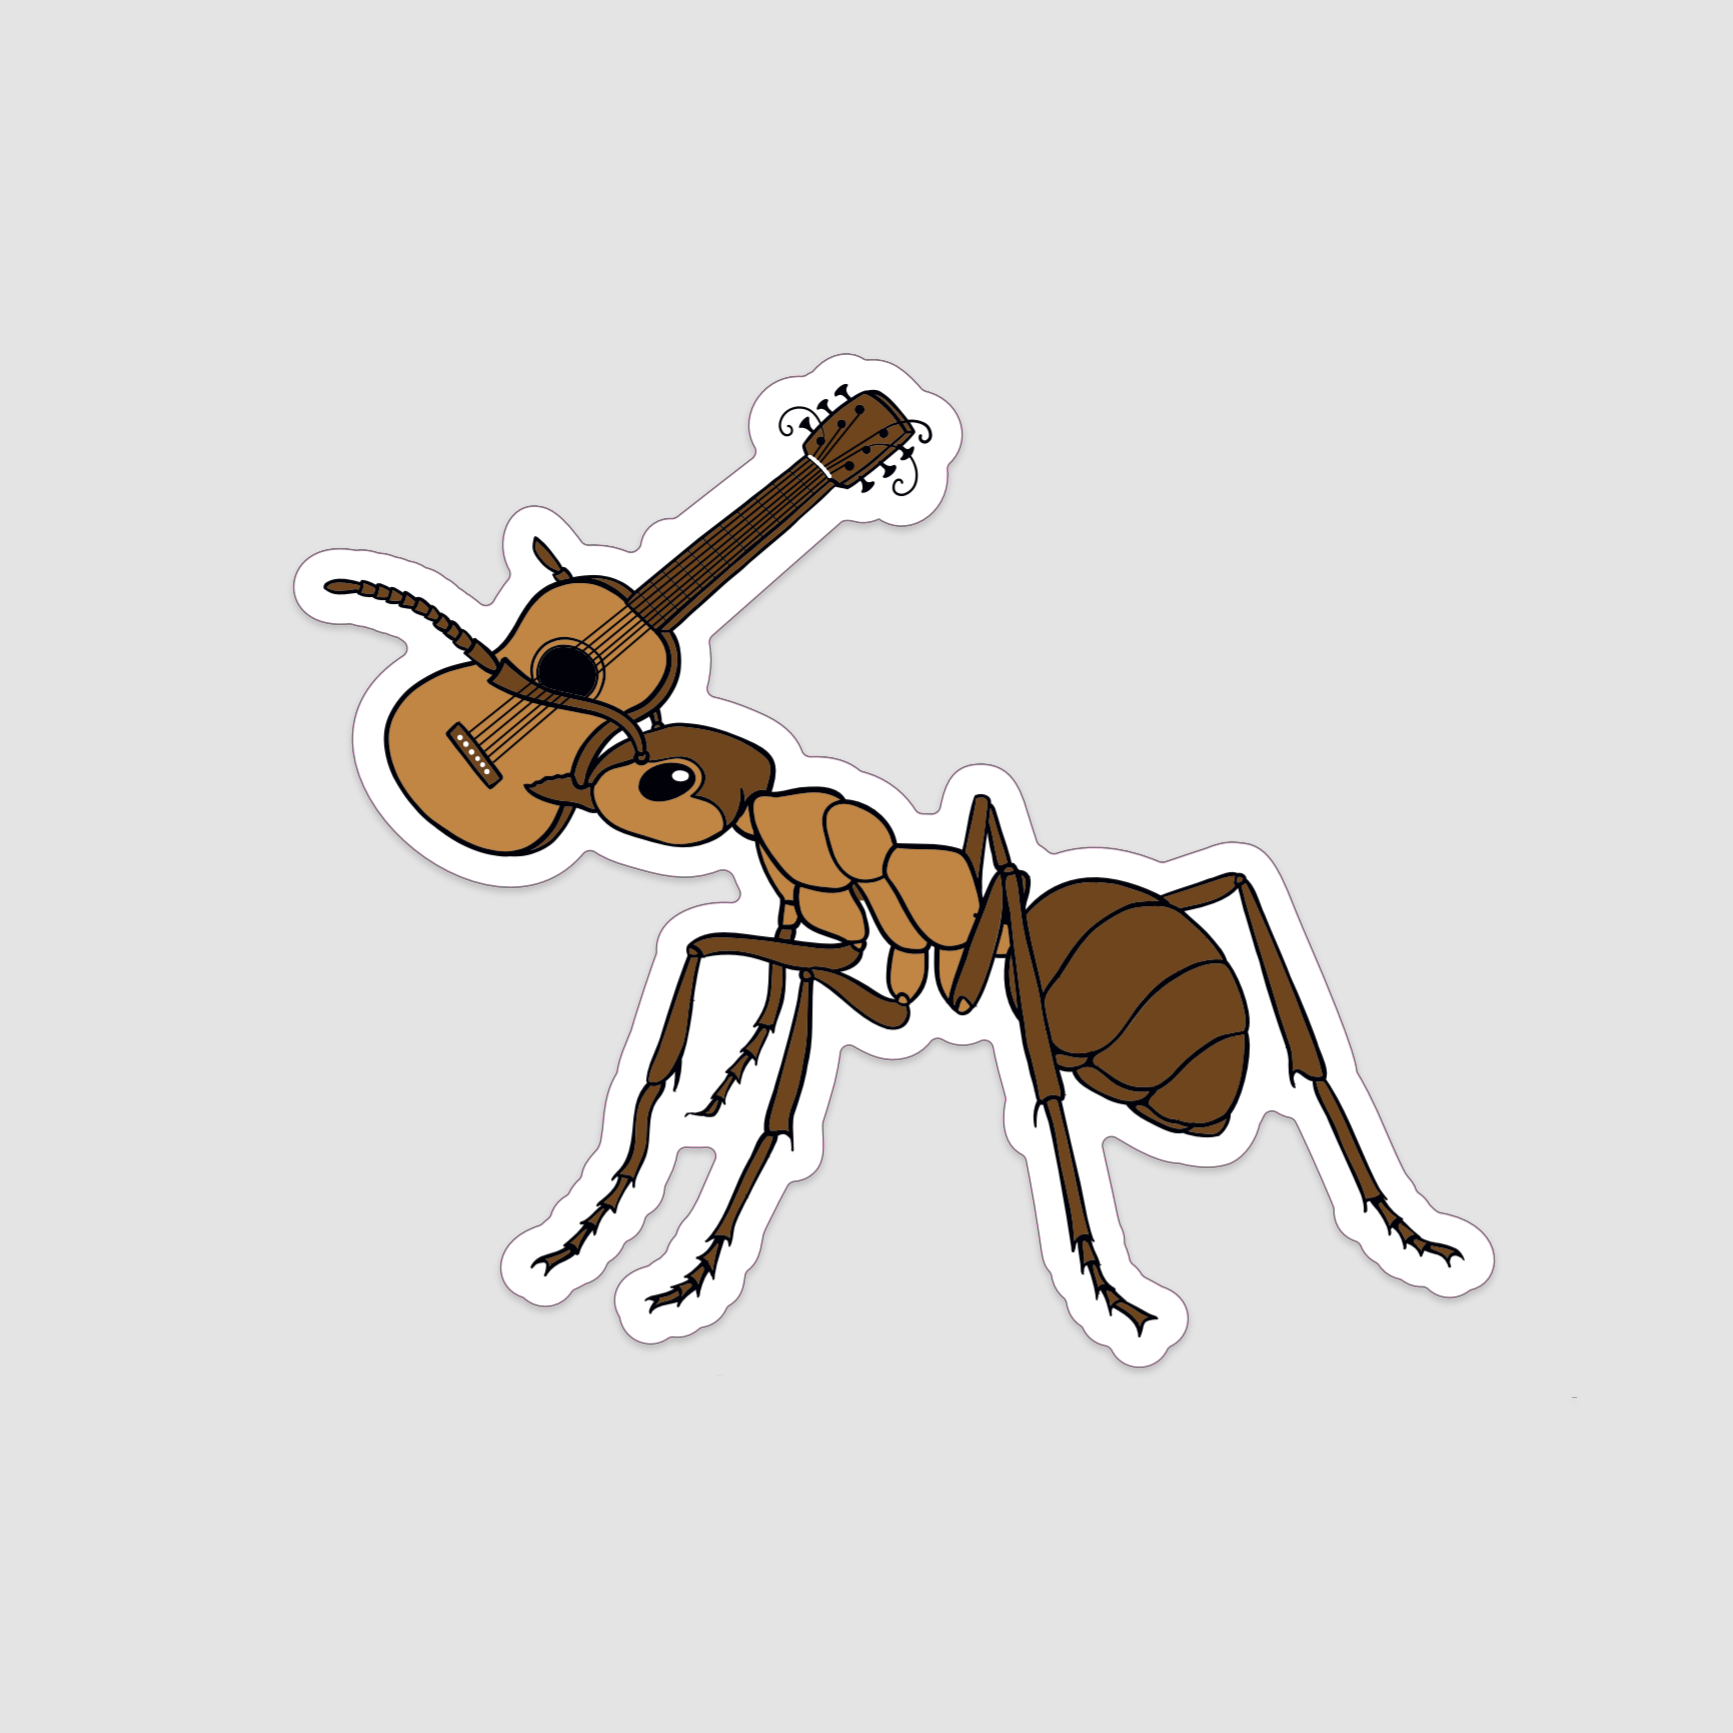 A vinyl sticker of a brown wood ant carrying an acoustic guitar.